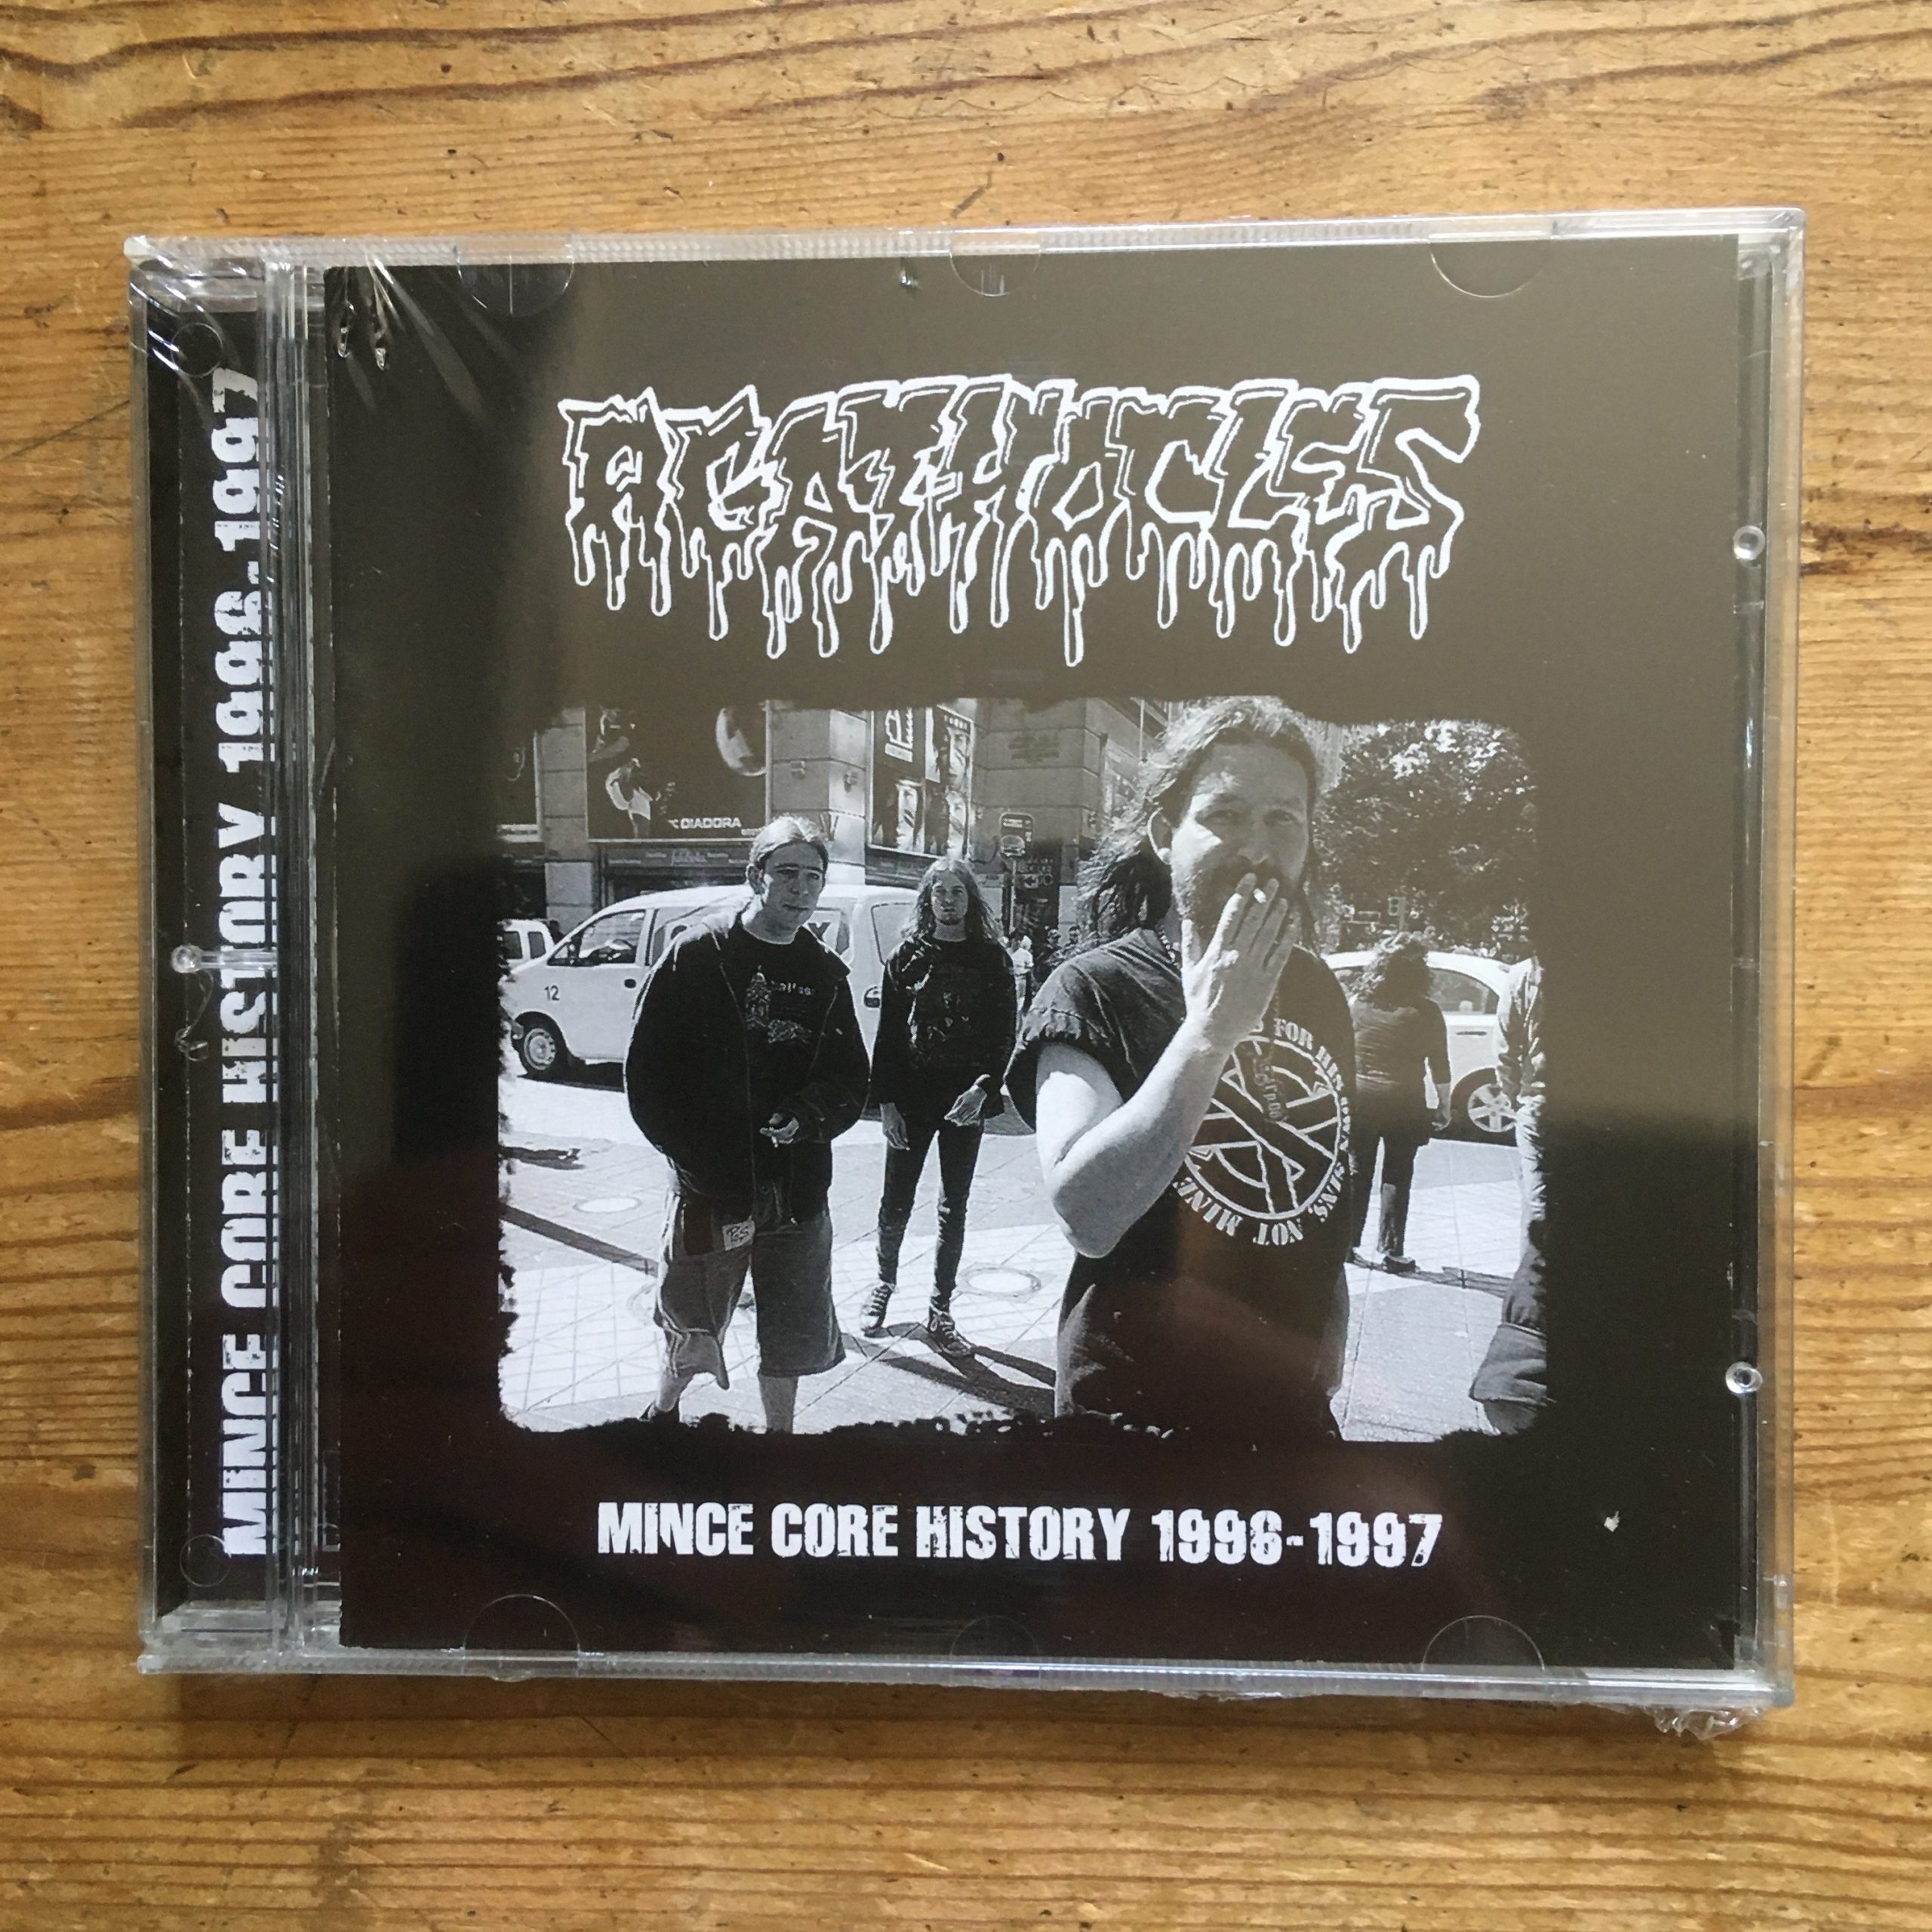 Photo of the Agathocles - "Mince Core History 1996-1997" CD